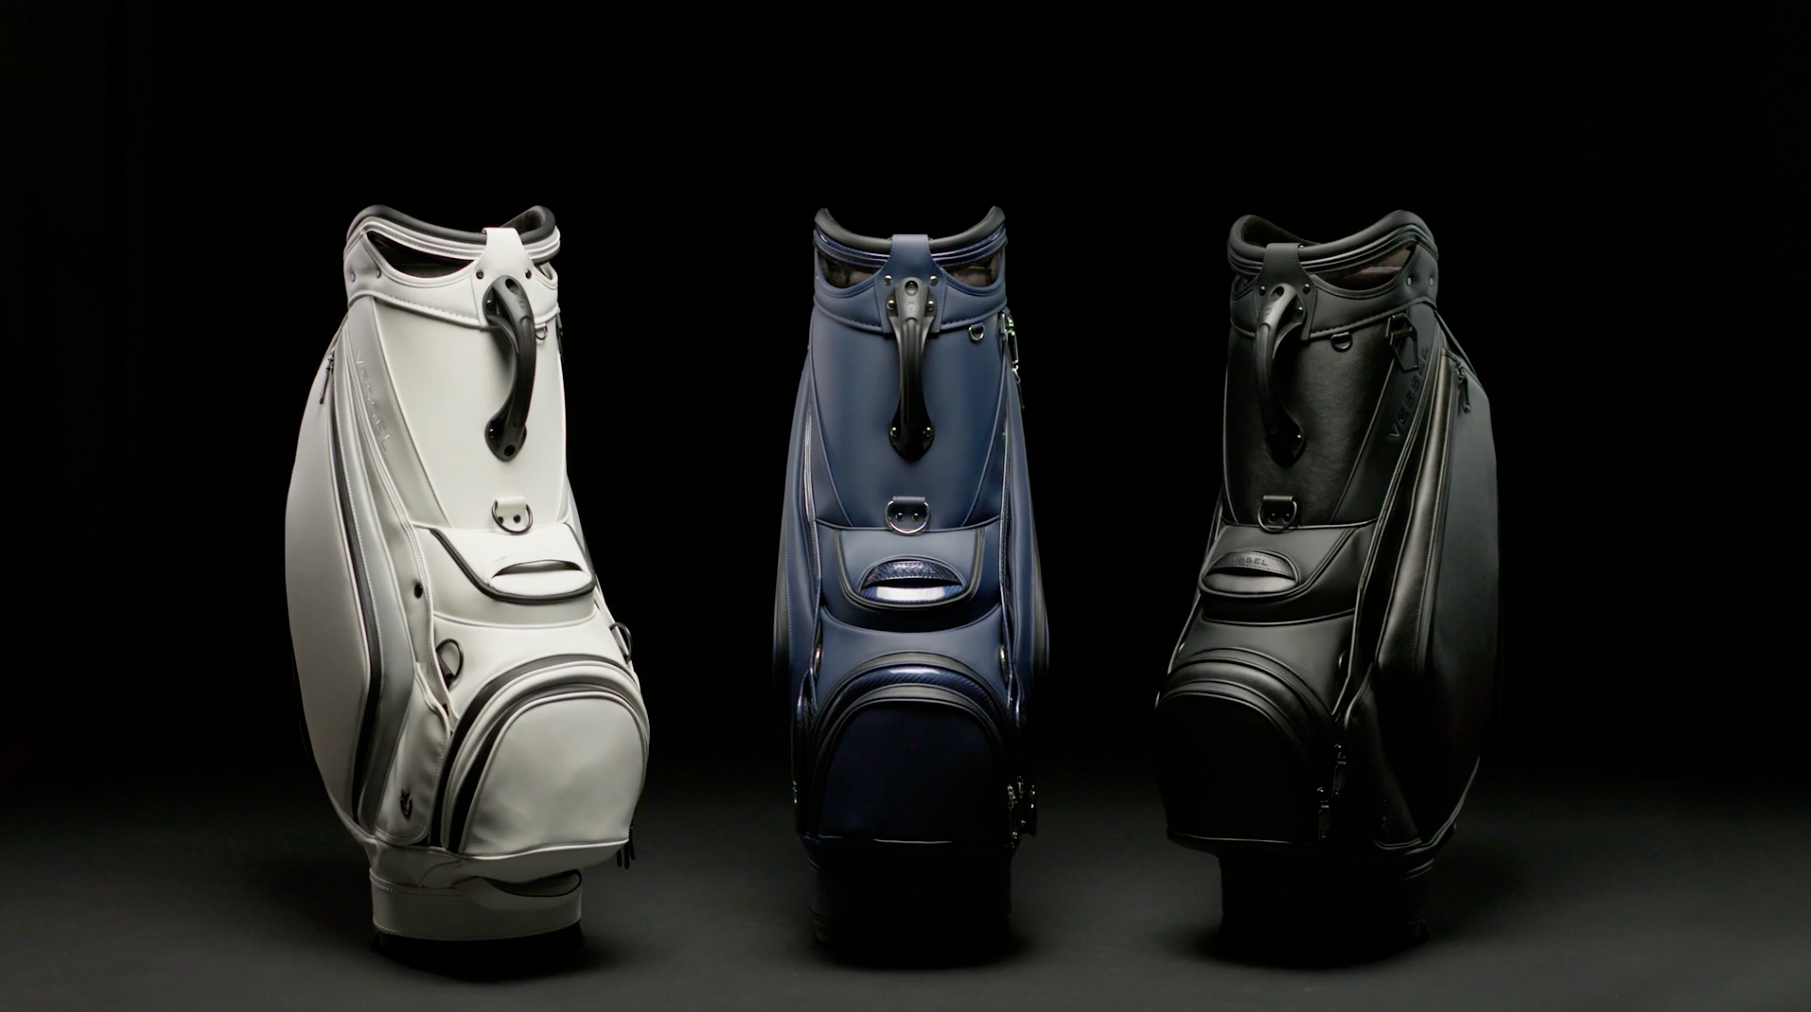 Three Prime 2.0 golf staff bags, one white, one blue, and one black, next to each other in a black studio